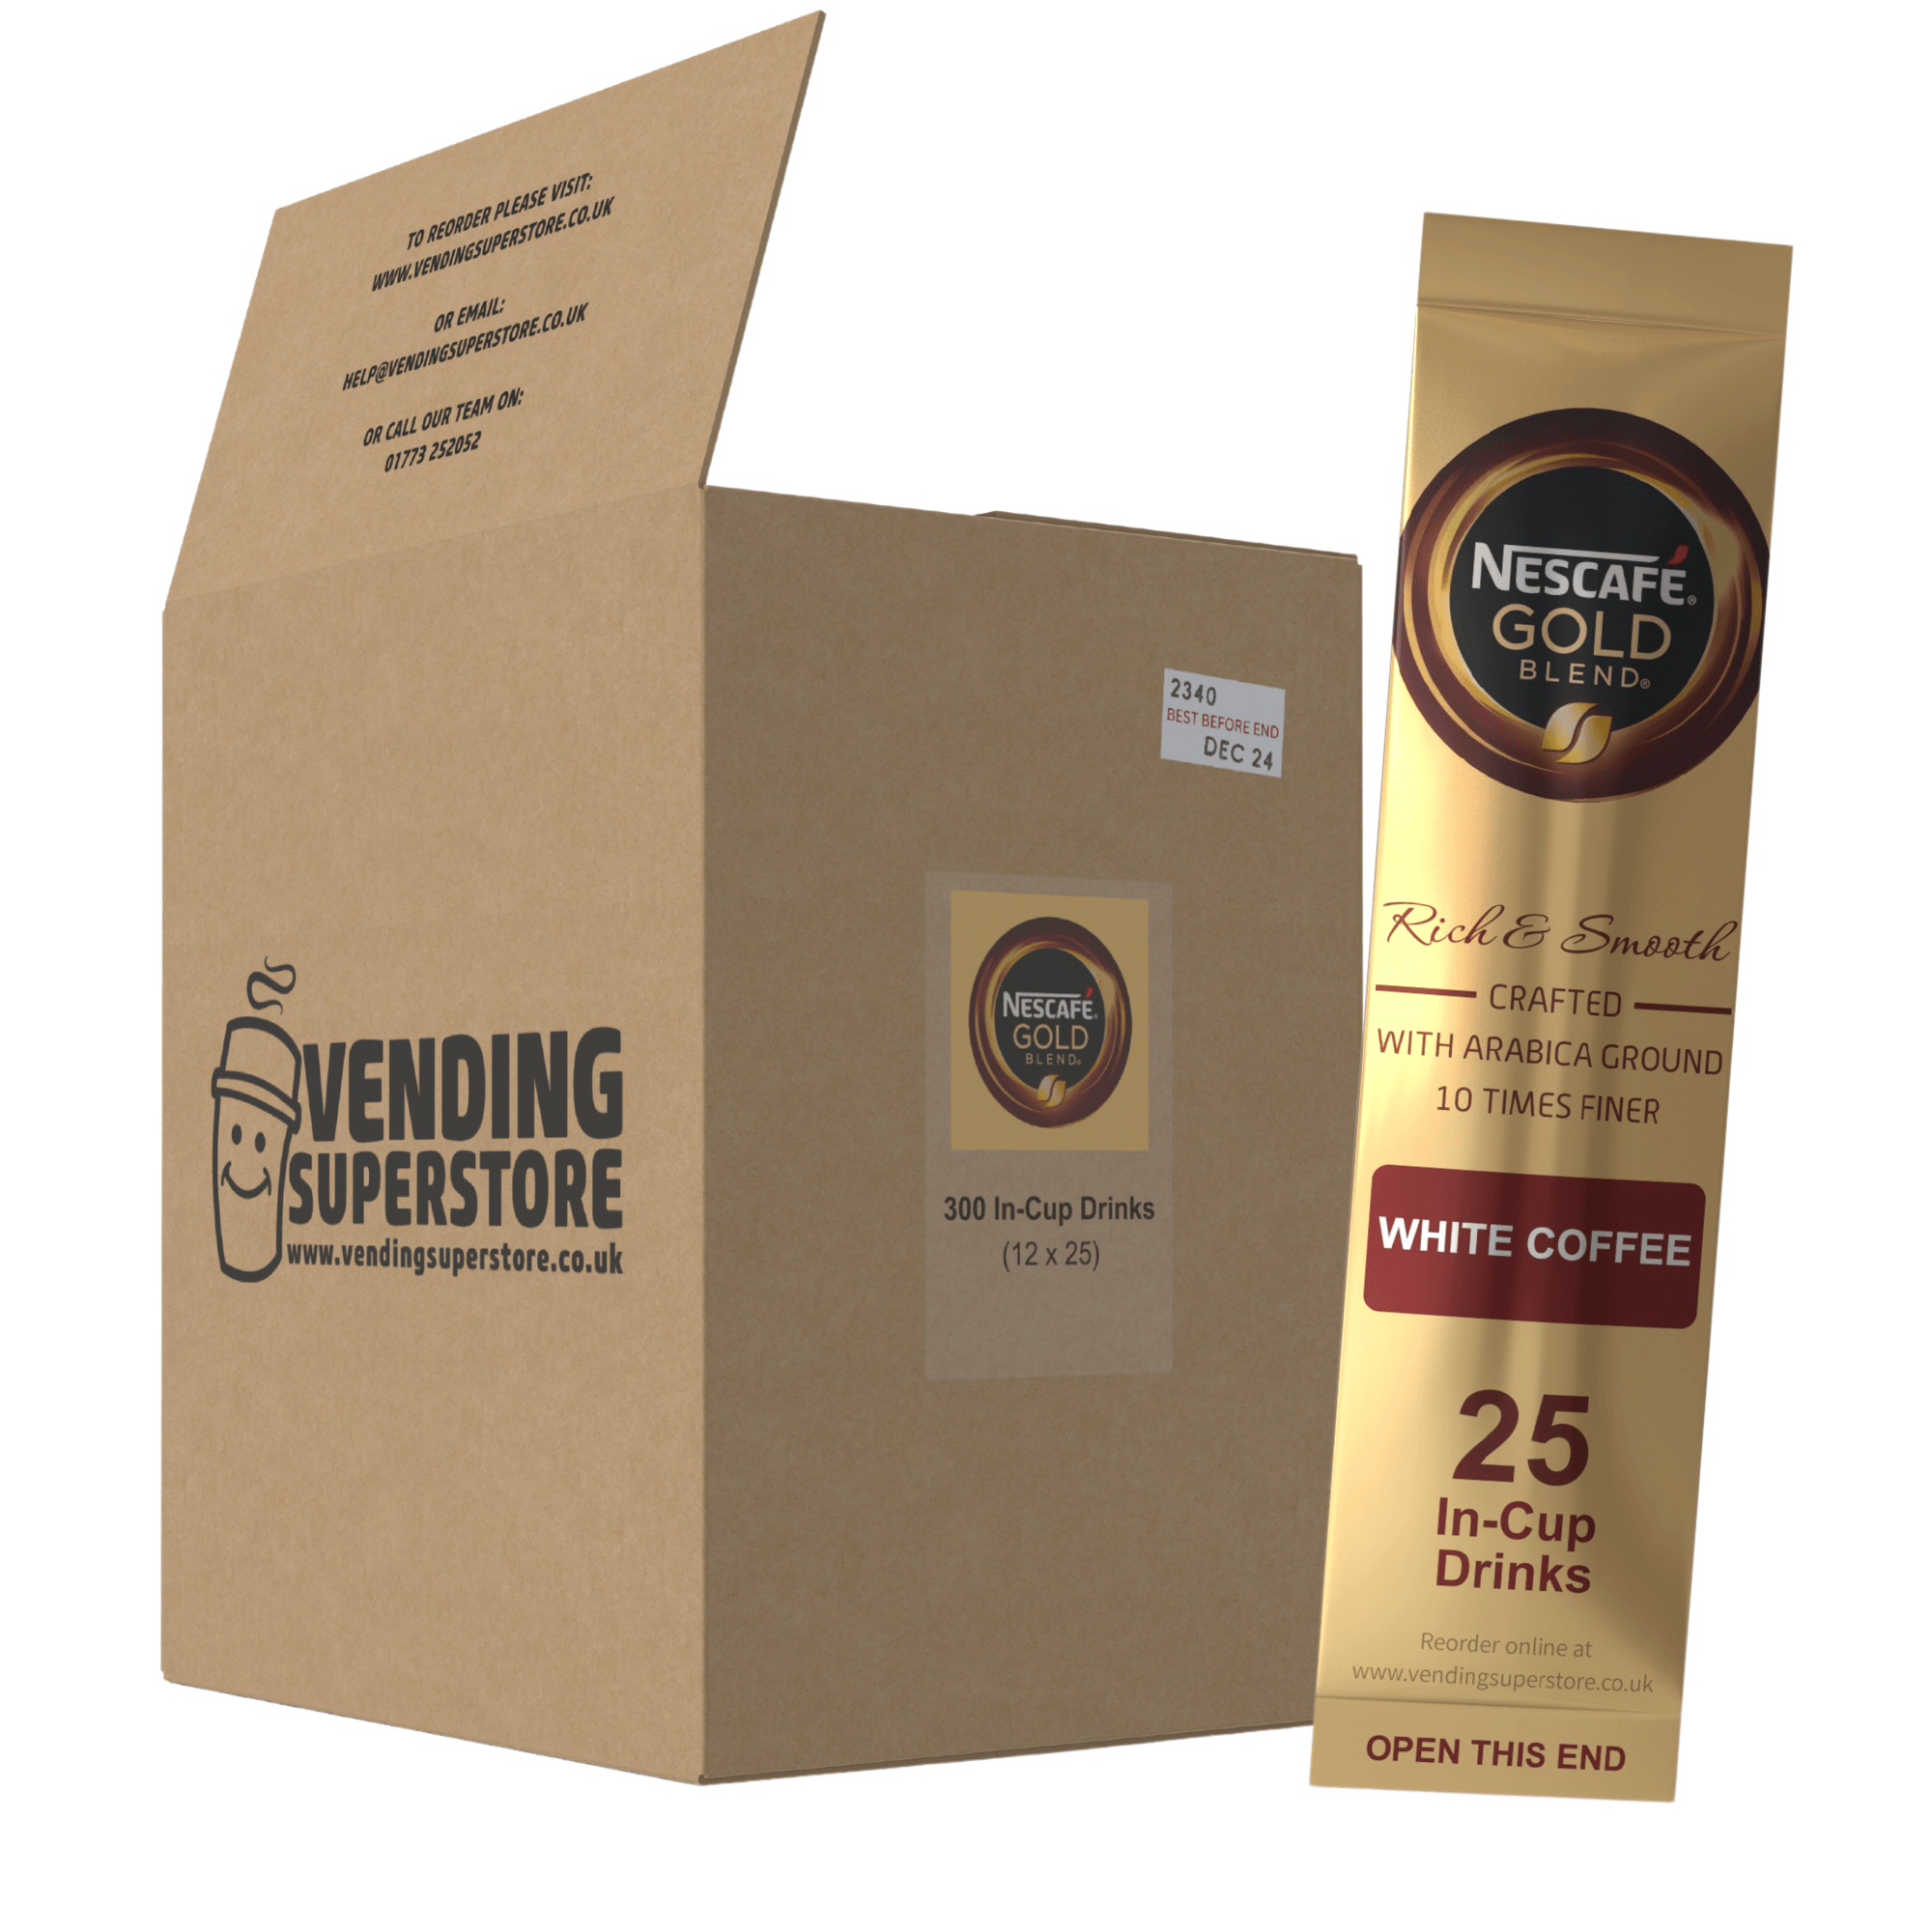 Incup Vending Drinks - Nescafe Gold Blend White Coffee - Case Of 300 Cups - Vending Superstore